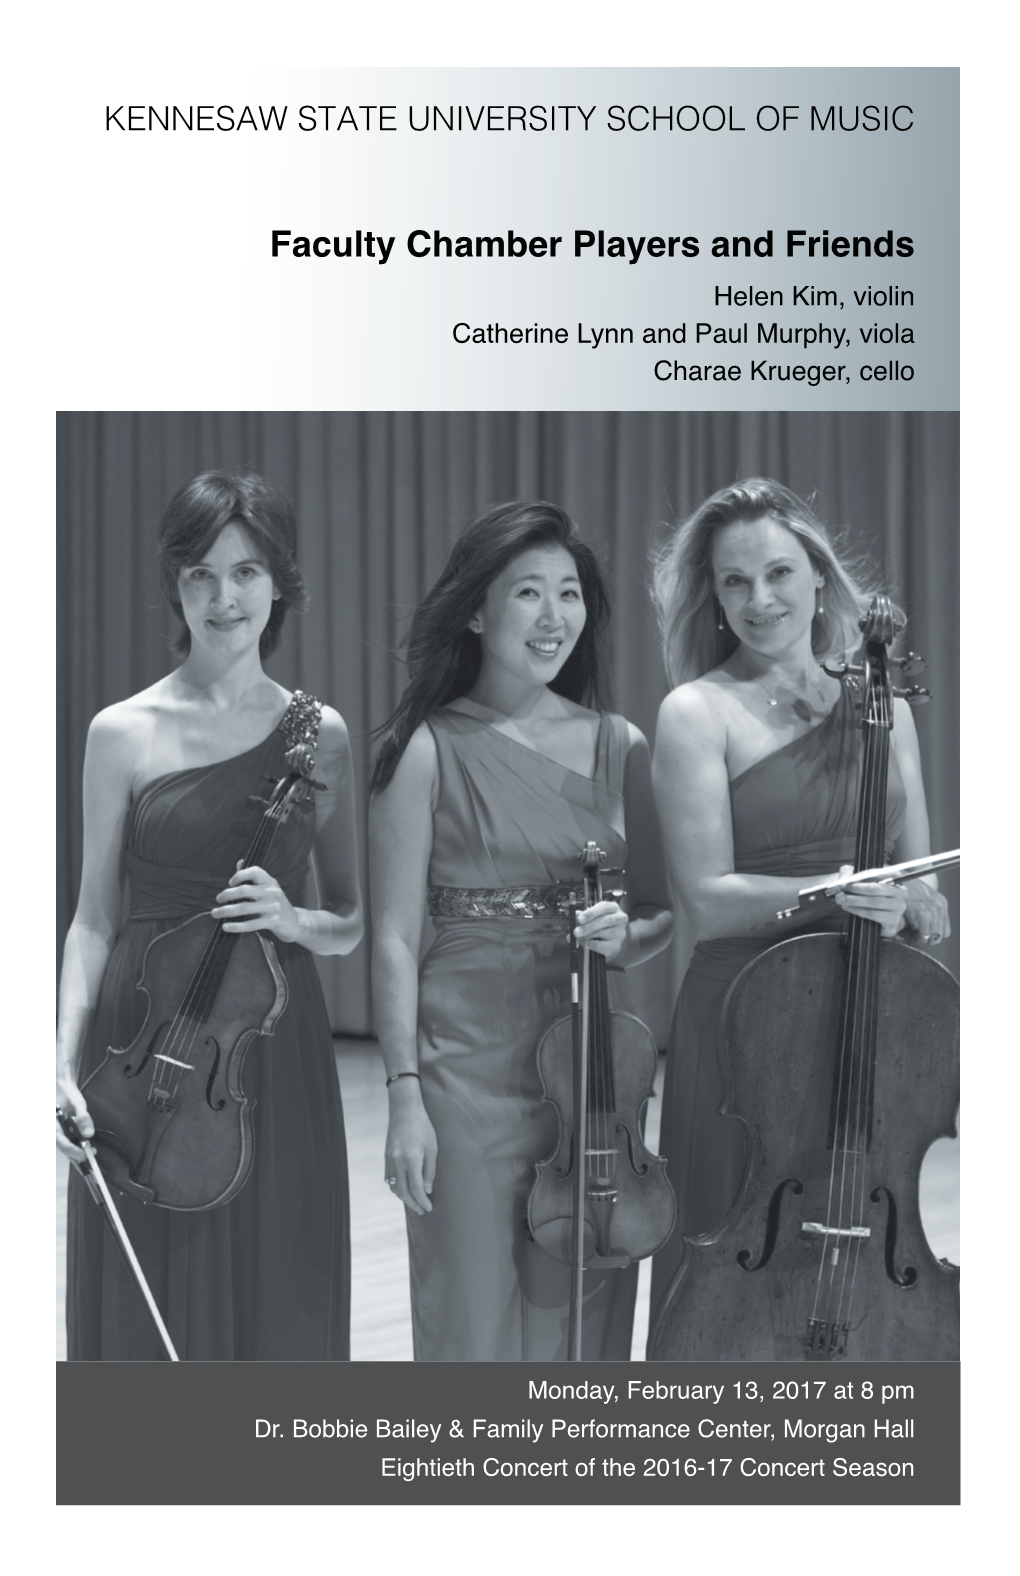 Faculty Chamber Players and Friends Helen Kim, Violin Catherine Lynn and Paul Murphy, Viola Charae Krueger, Cello